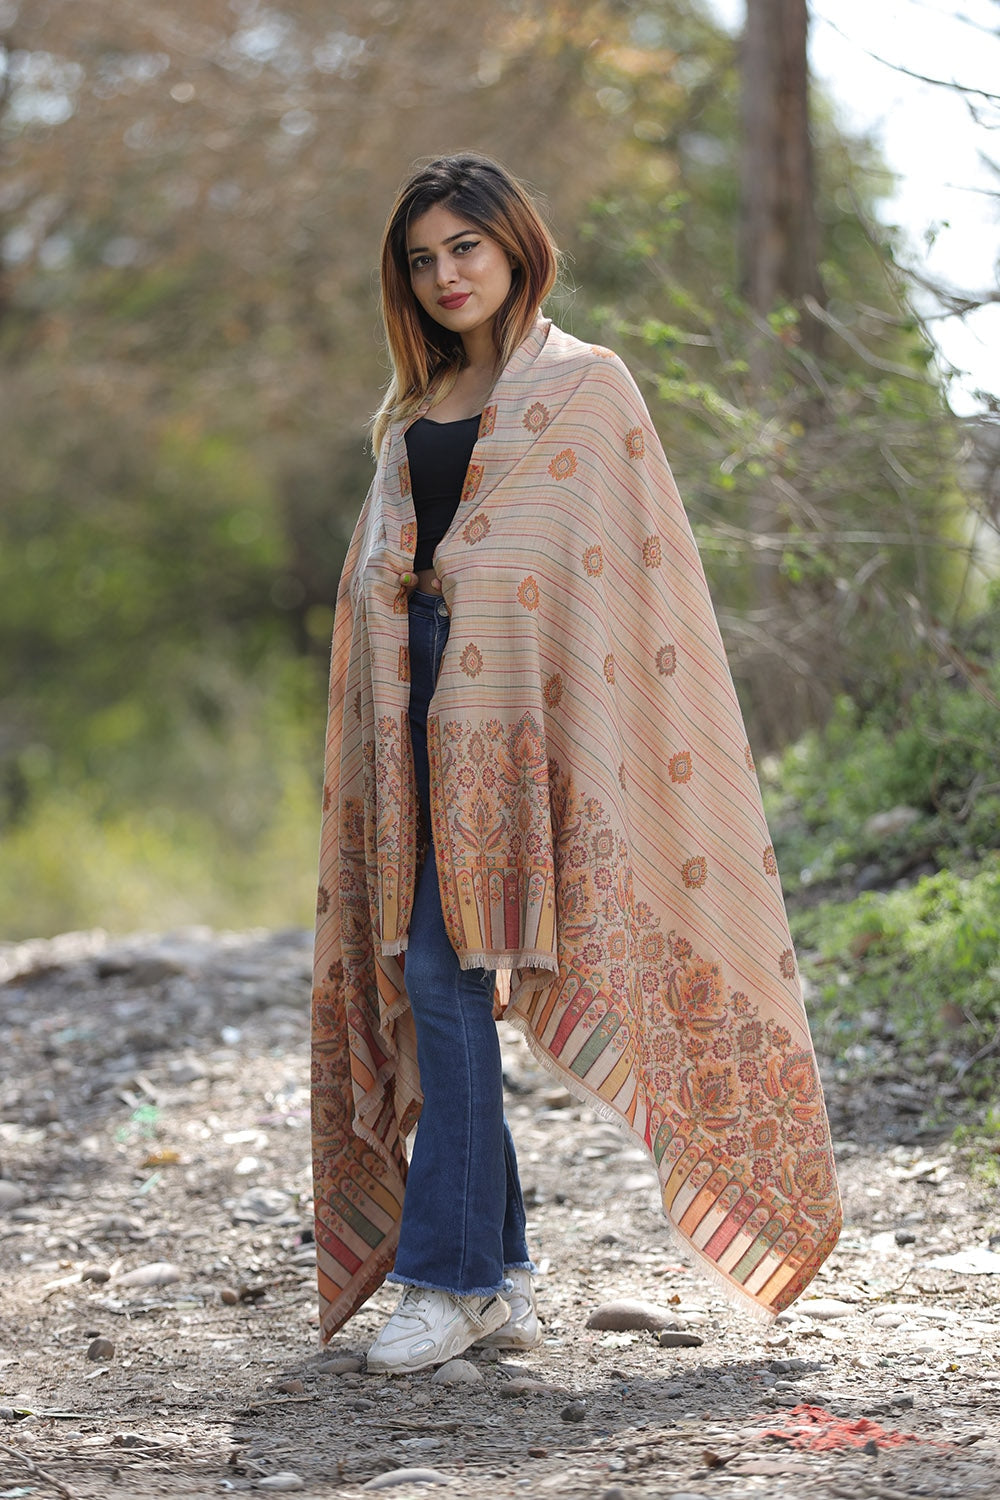 Steady Beige Colour Shawl With Flower Pattern Style Bold